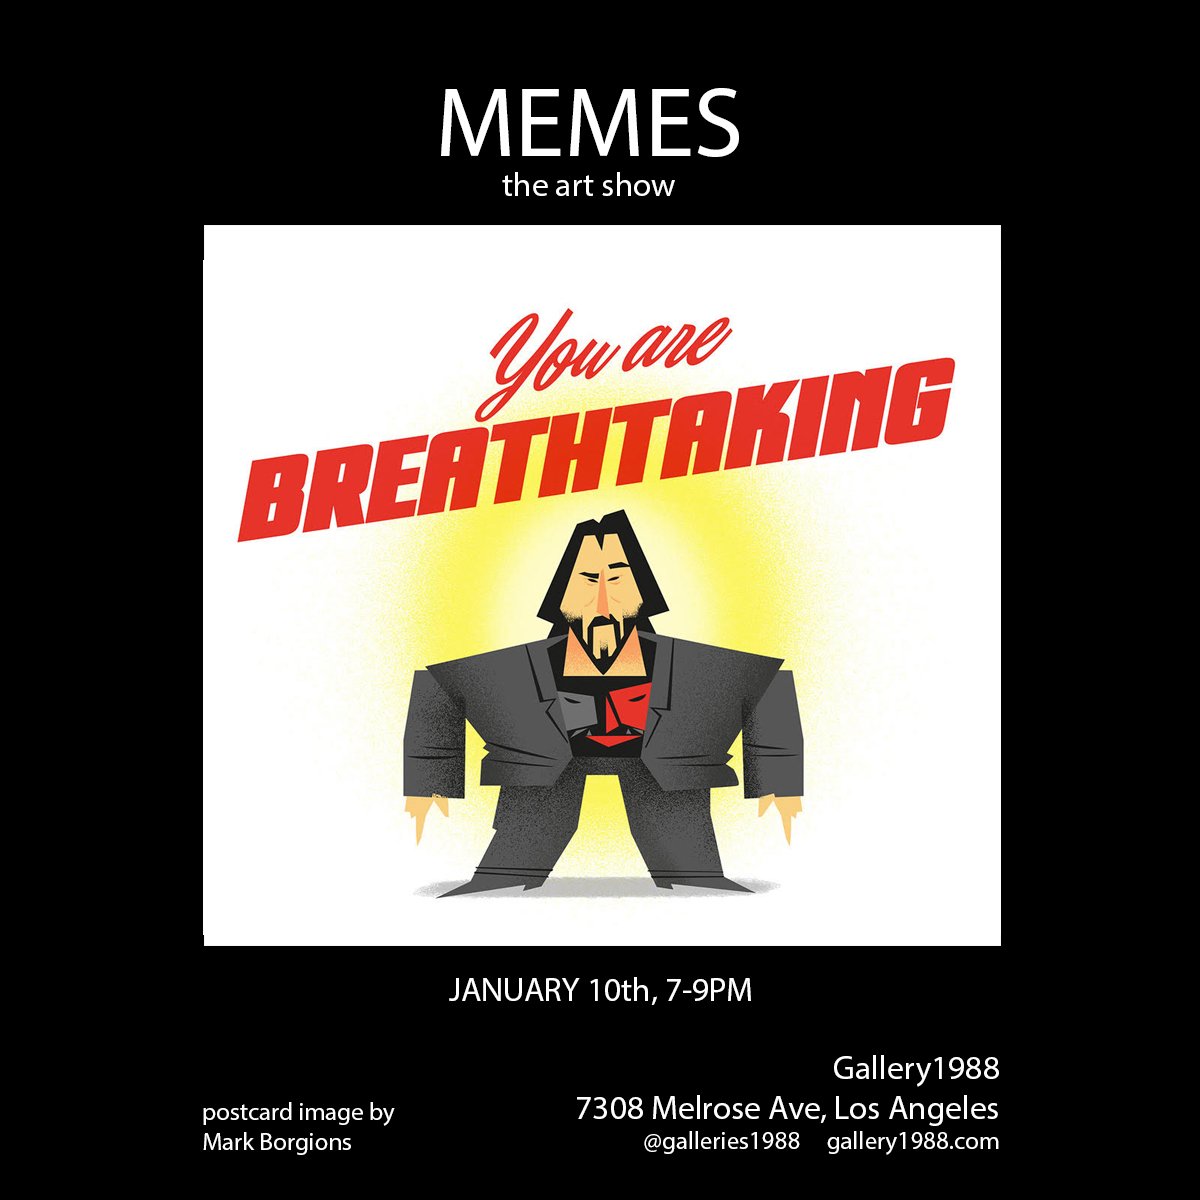 Memes Art Show opens today!